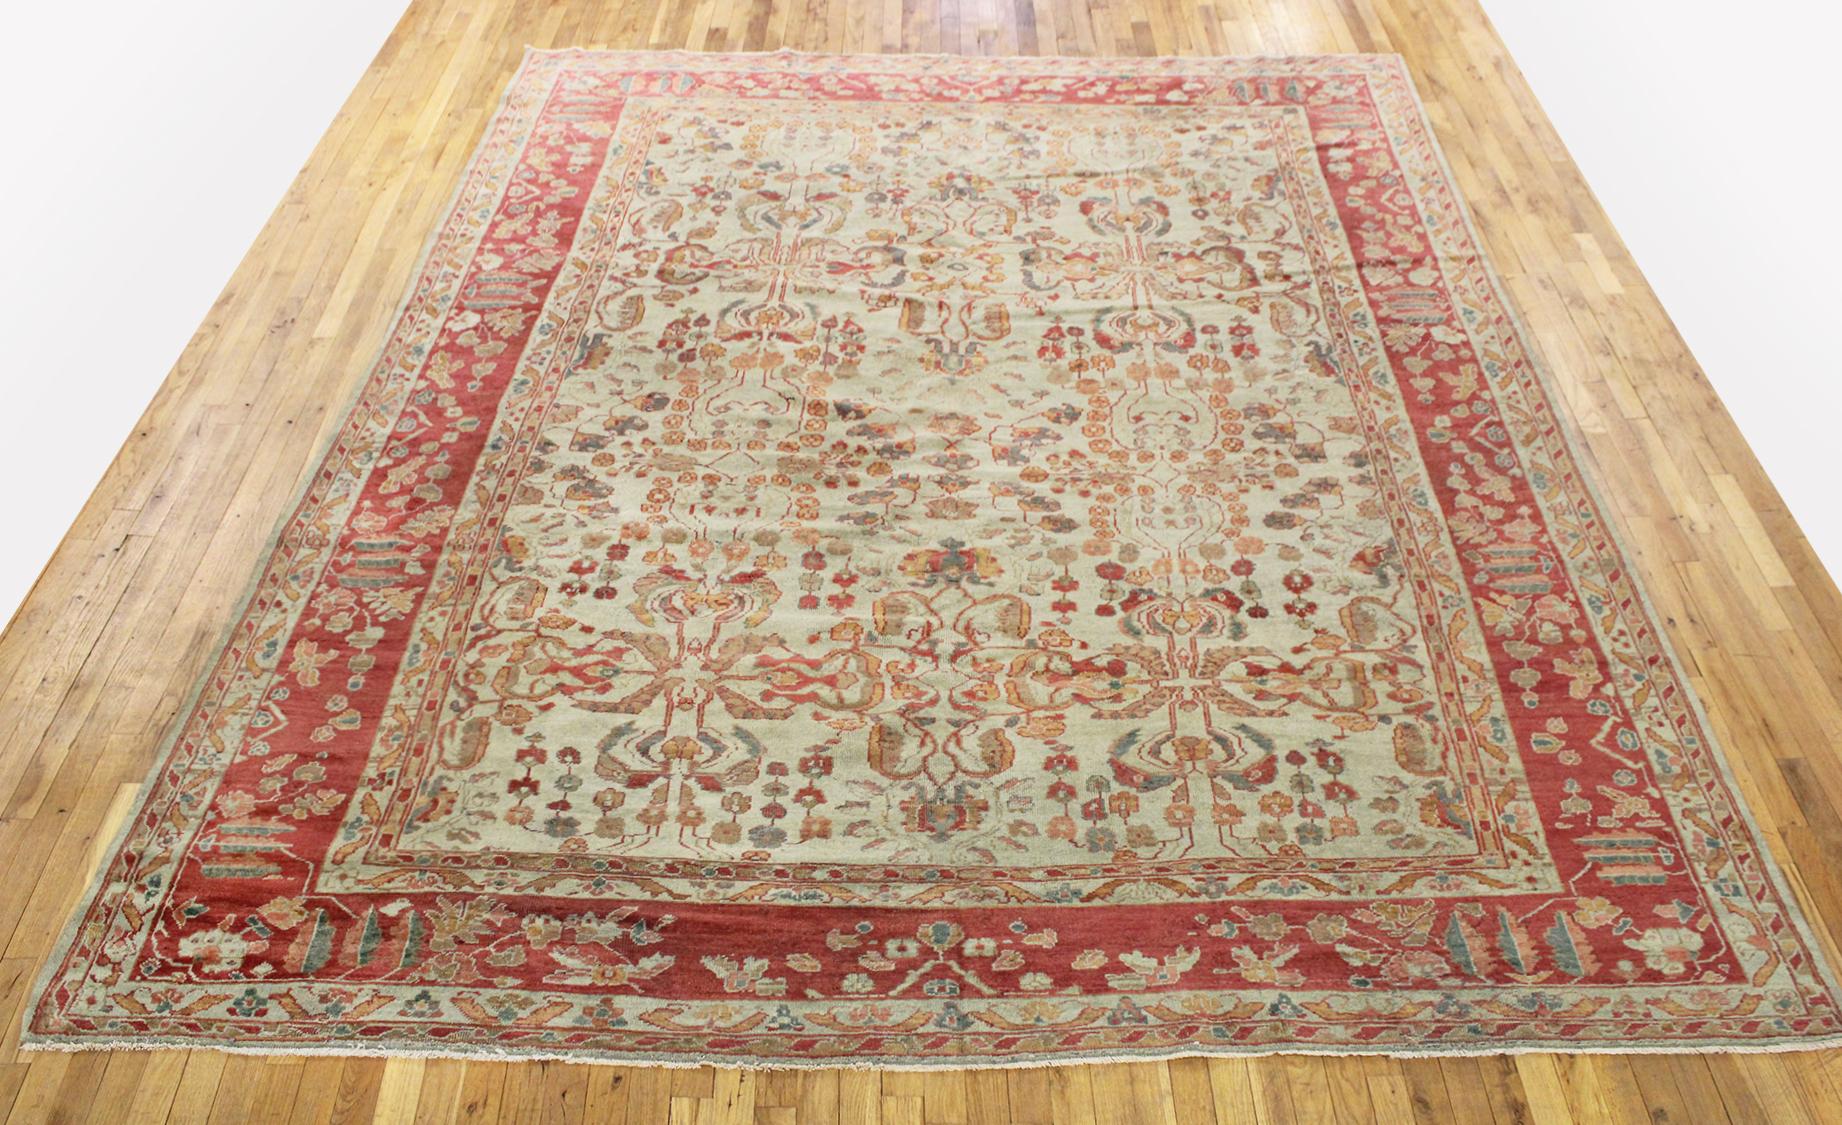 Antique Persian Sultanabad Rug, Room size, circa 1900

A one-of-a-kind antique Persian Sultanabad oriental carpet with a thick and lustrous wool pile, knotted by hand, with soft touch and great resistance to wear. This carpet features a symmetrical